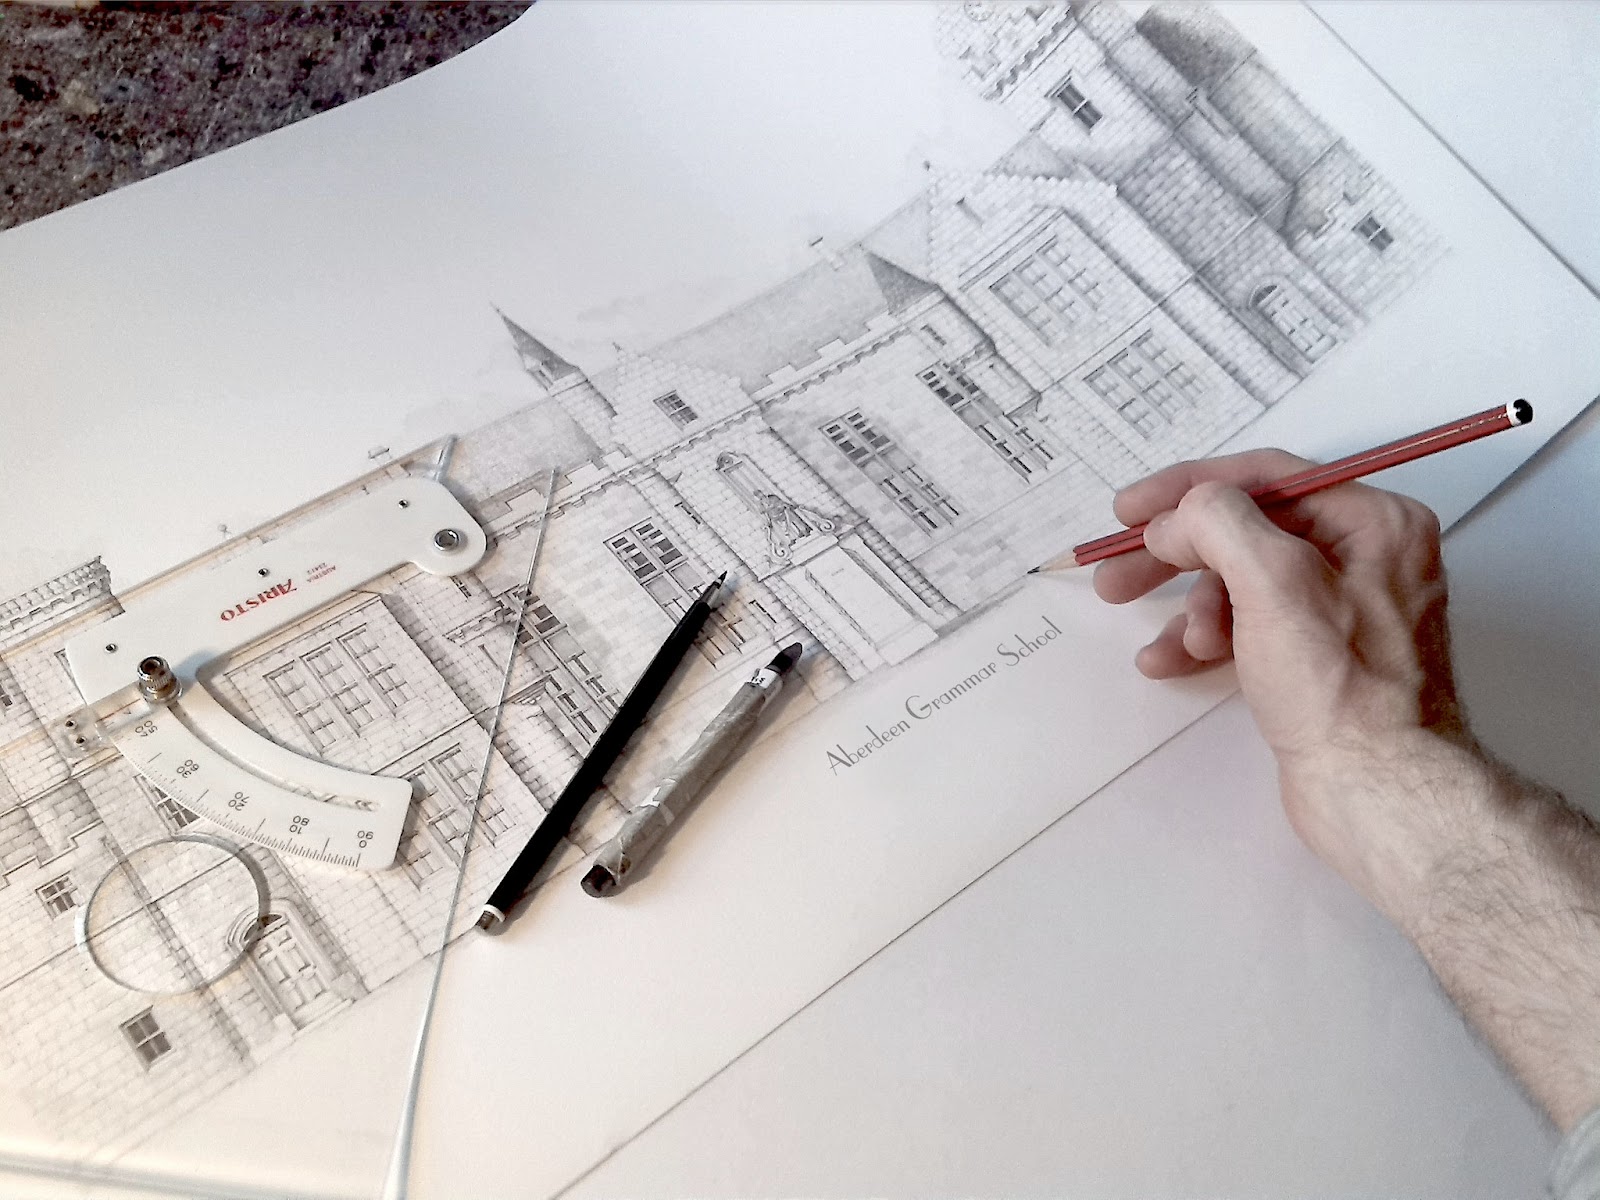 02-Aberdeen-s-The-Grammar-Jamie-Cameron-Intricate-Architectural-Drawings-and-Illustrations-www-designstack-co